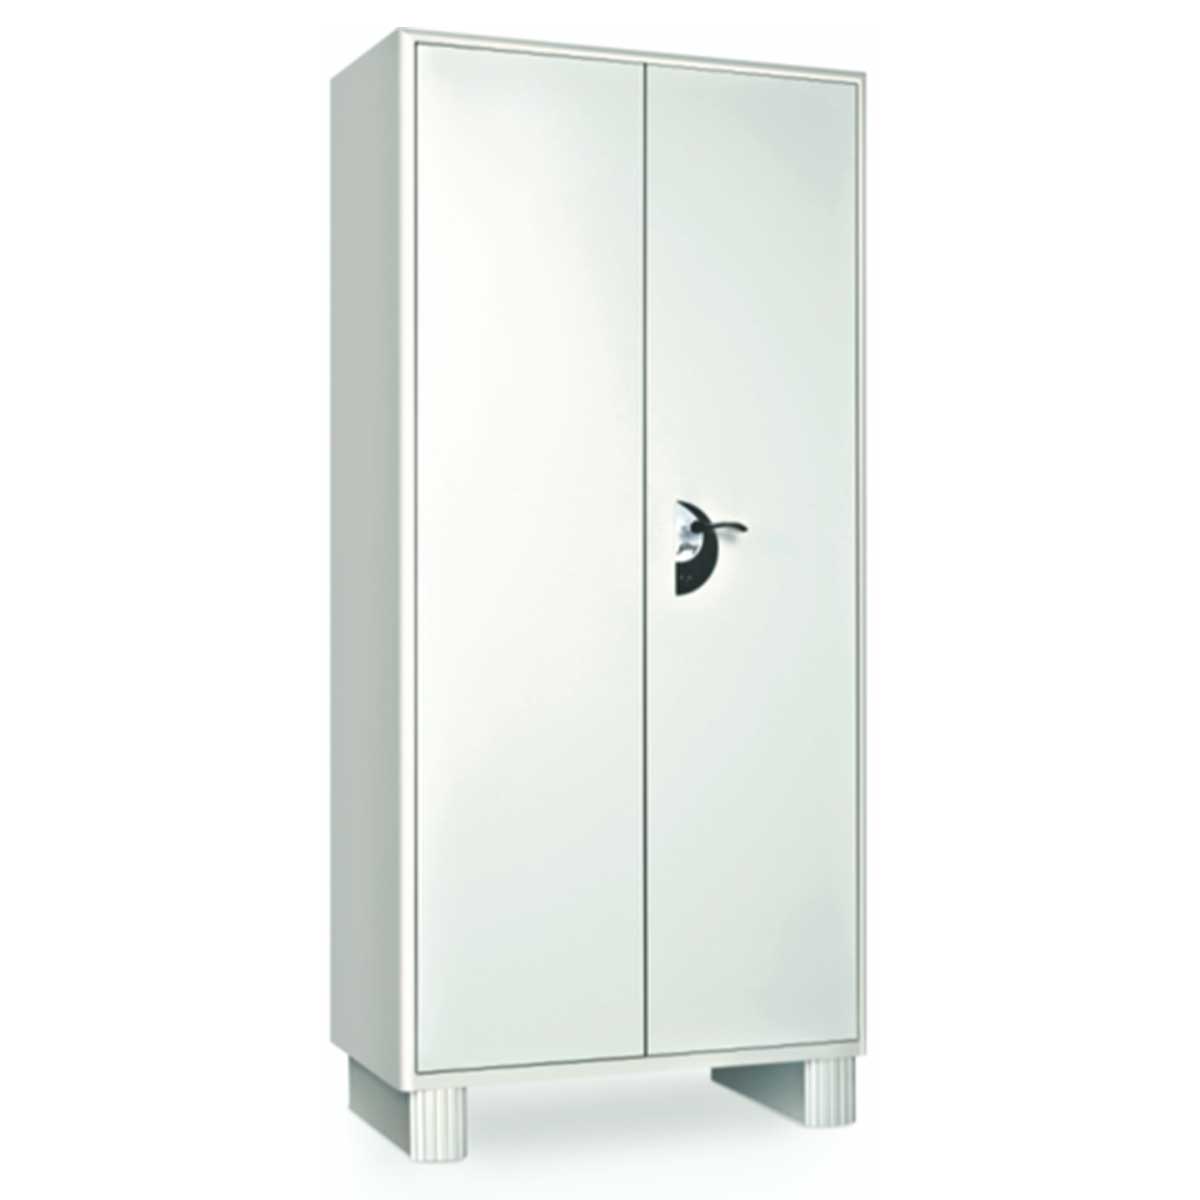 Cupboards Manufacturers, Suppliers in Dwarka Sector 26